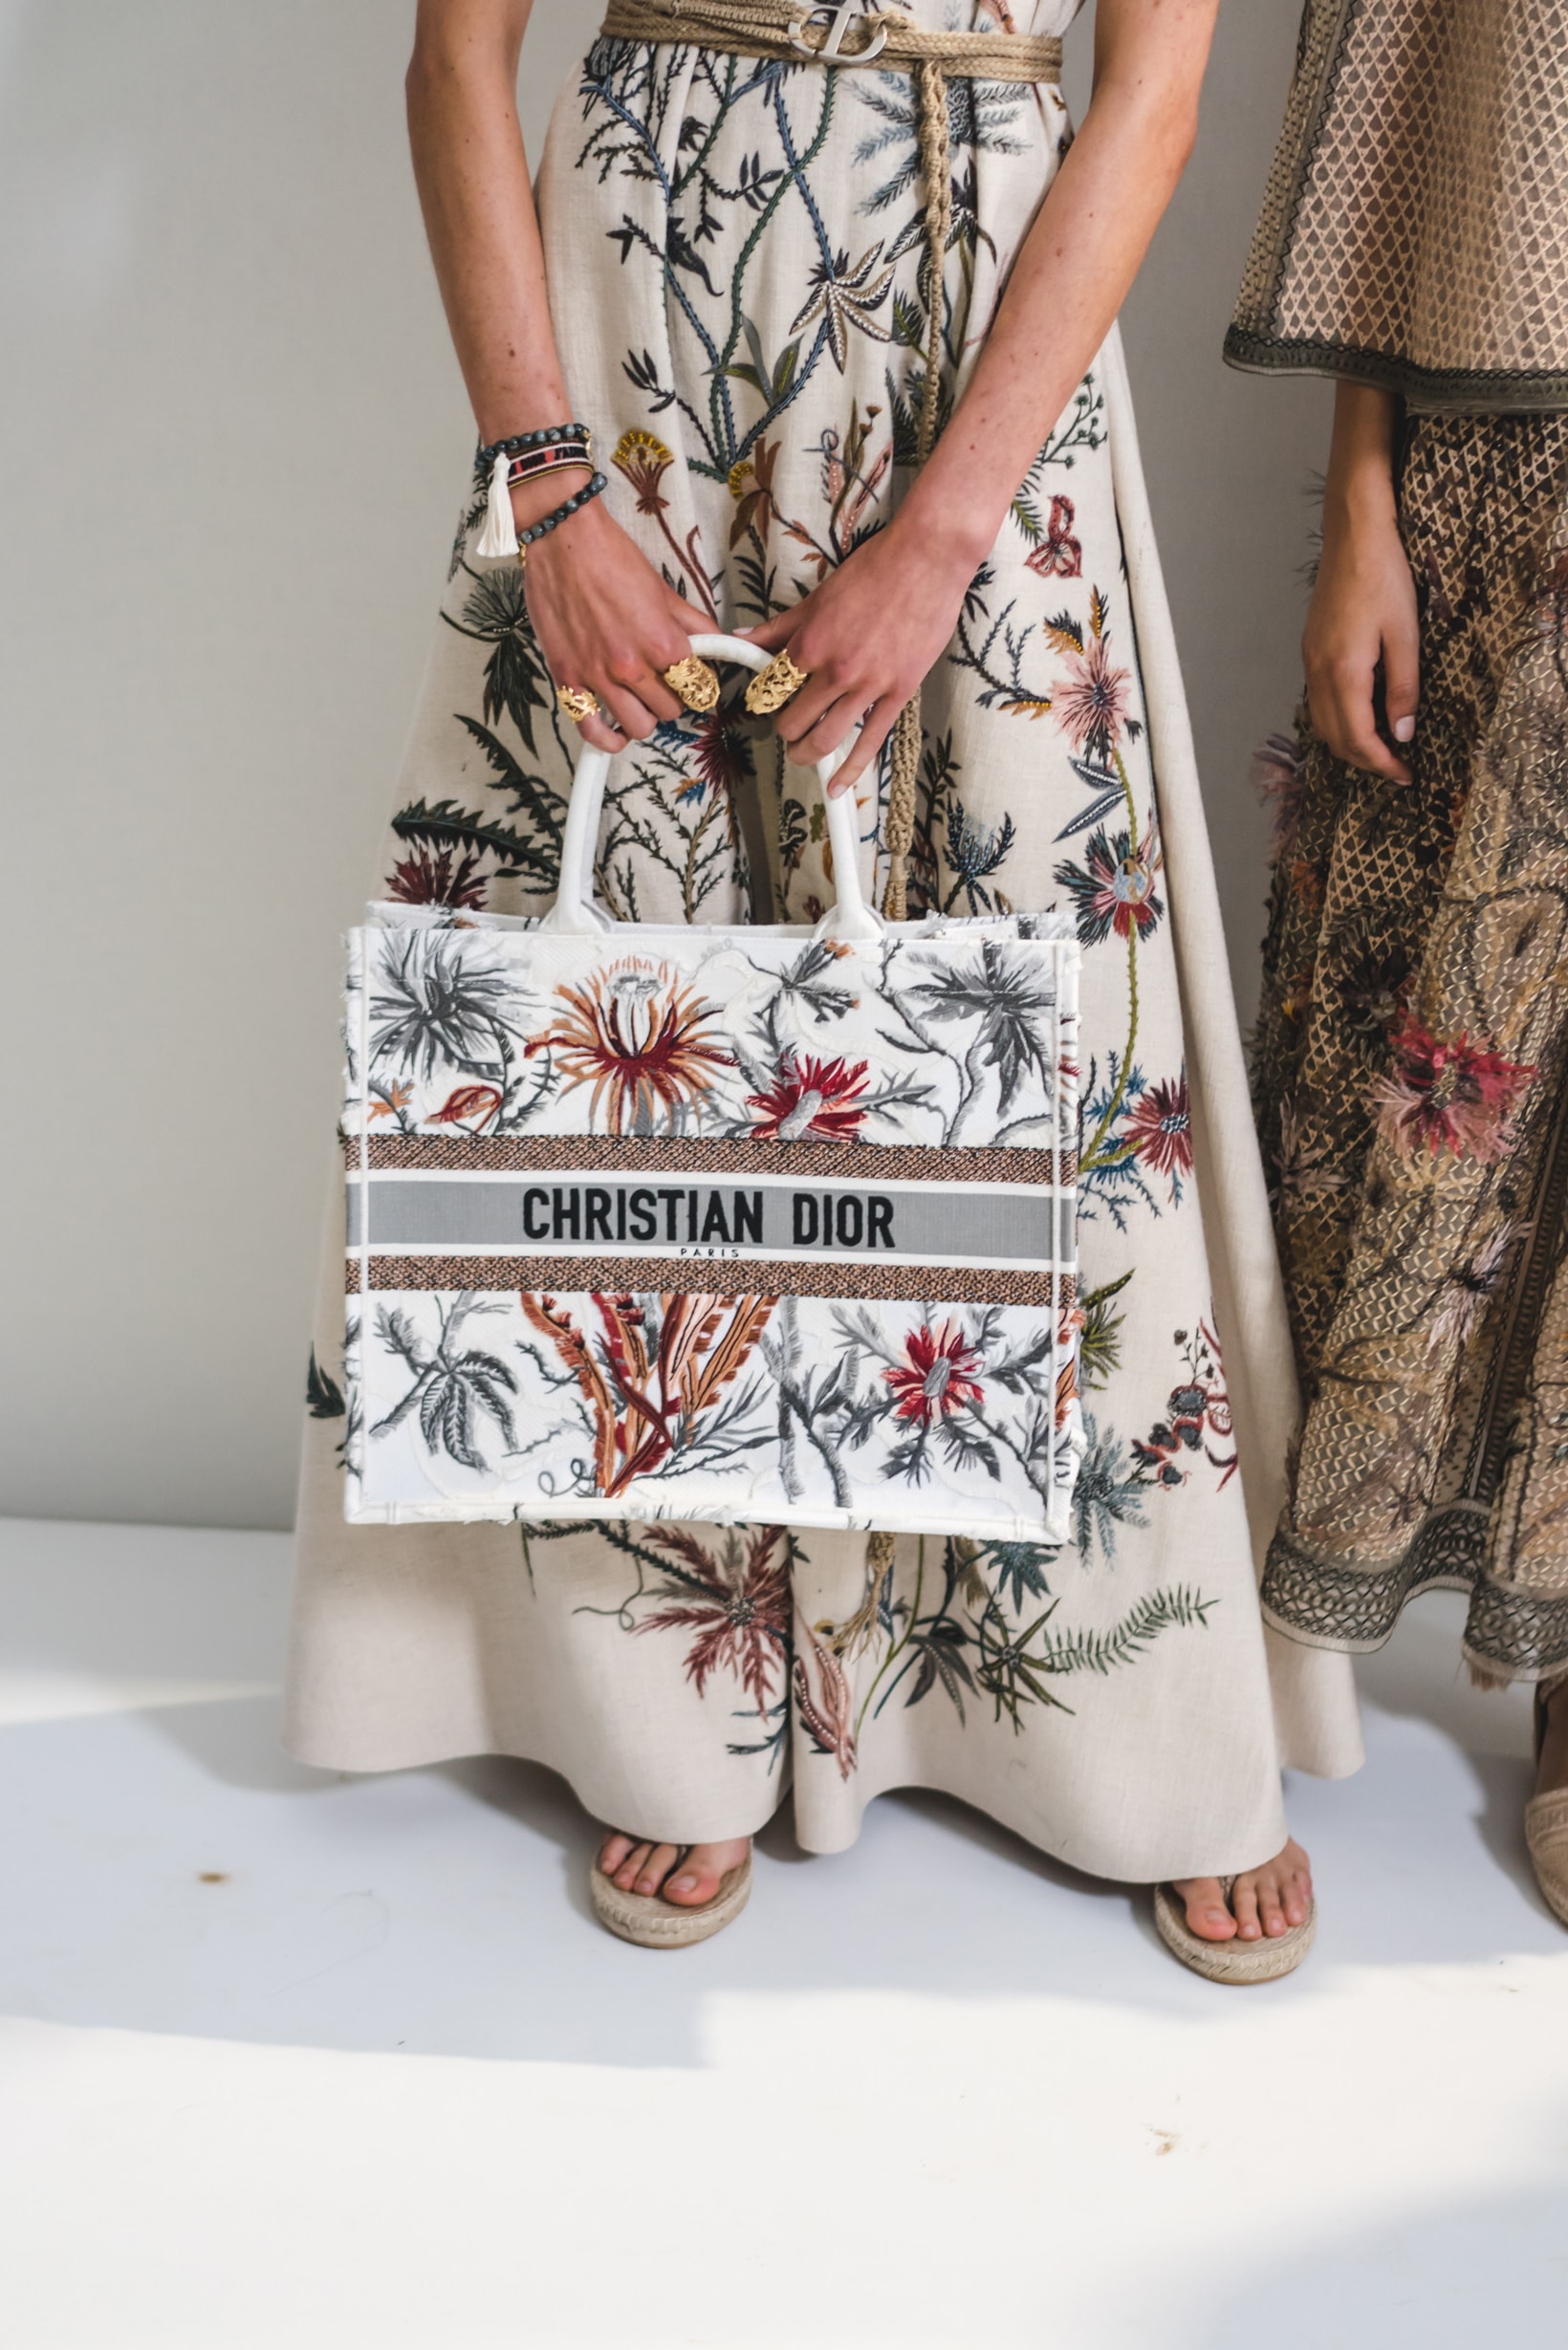 Dior Spring Summer 2020 Paris Fashion Week Collection Show Backstage Look Embroidered Bag White